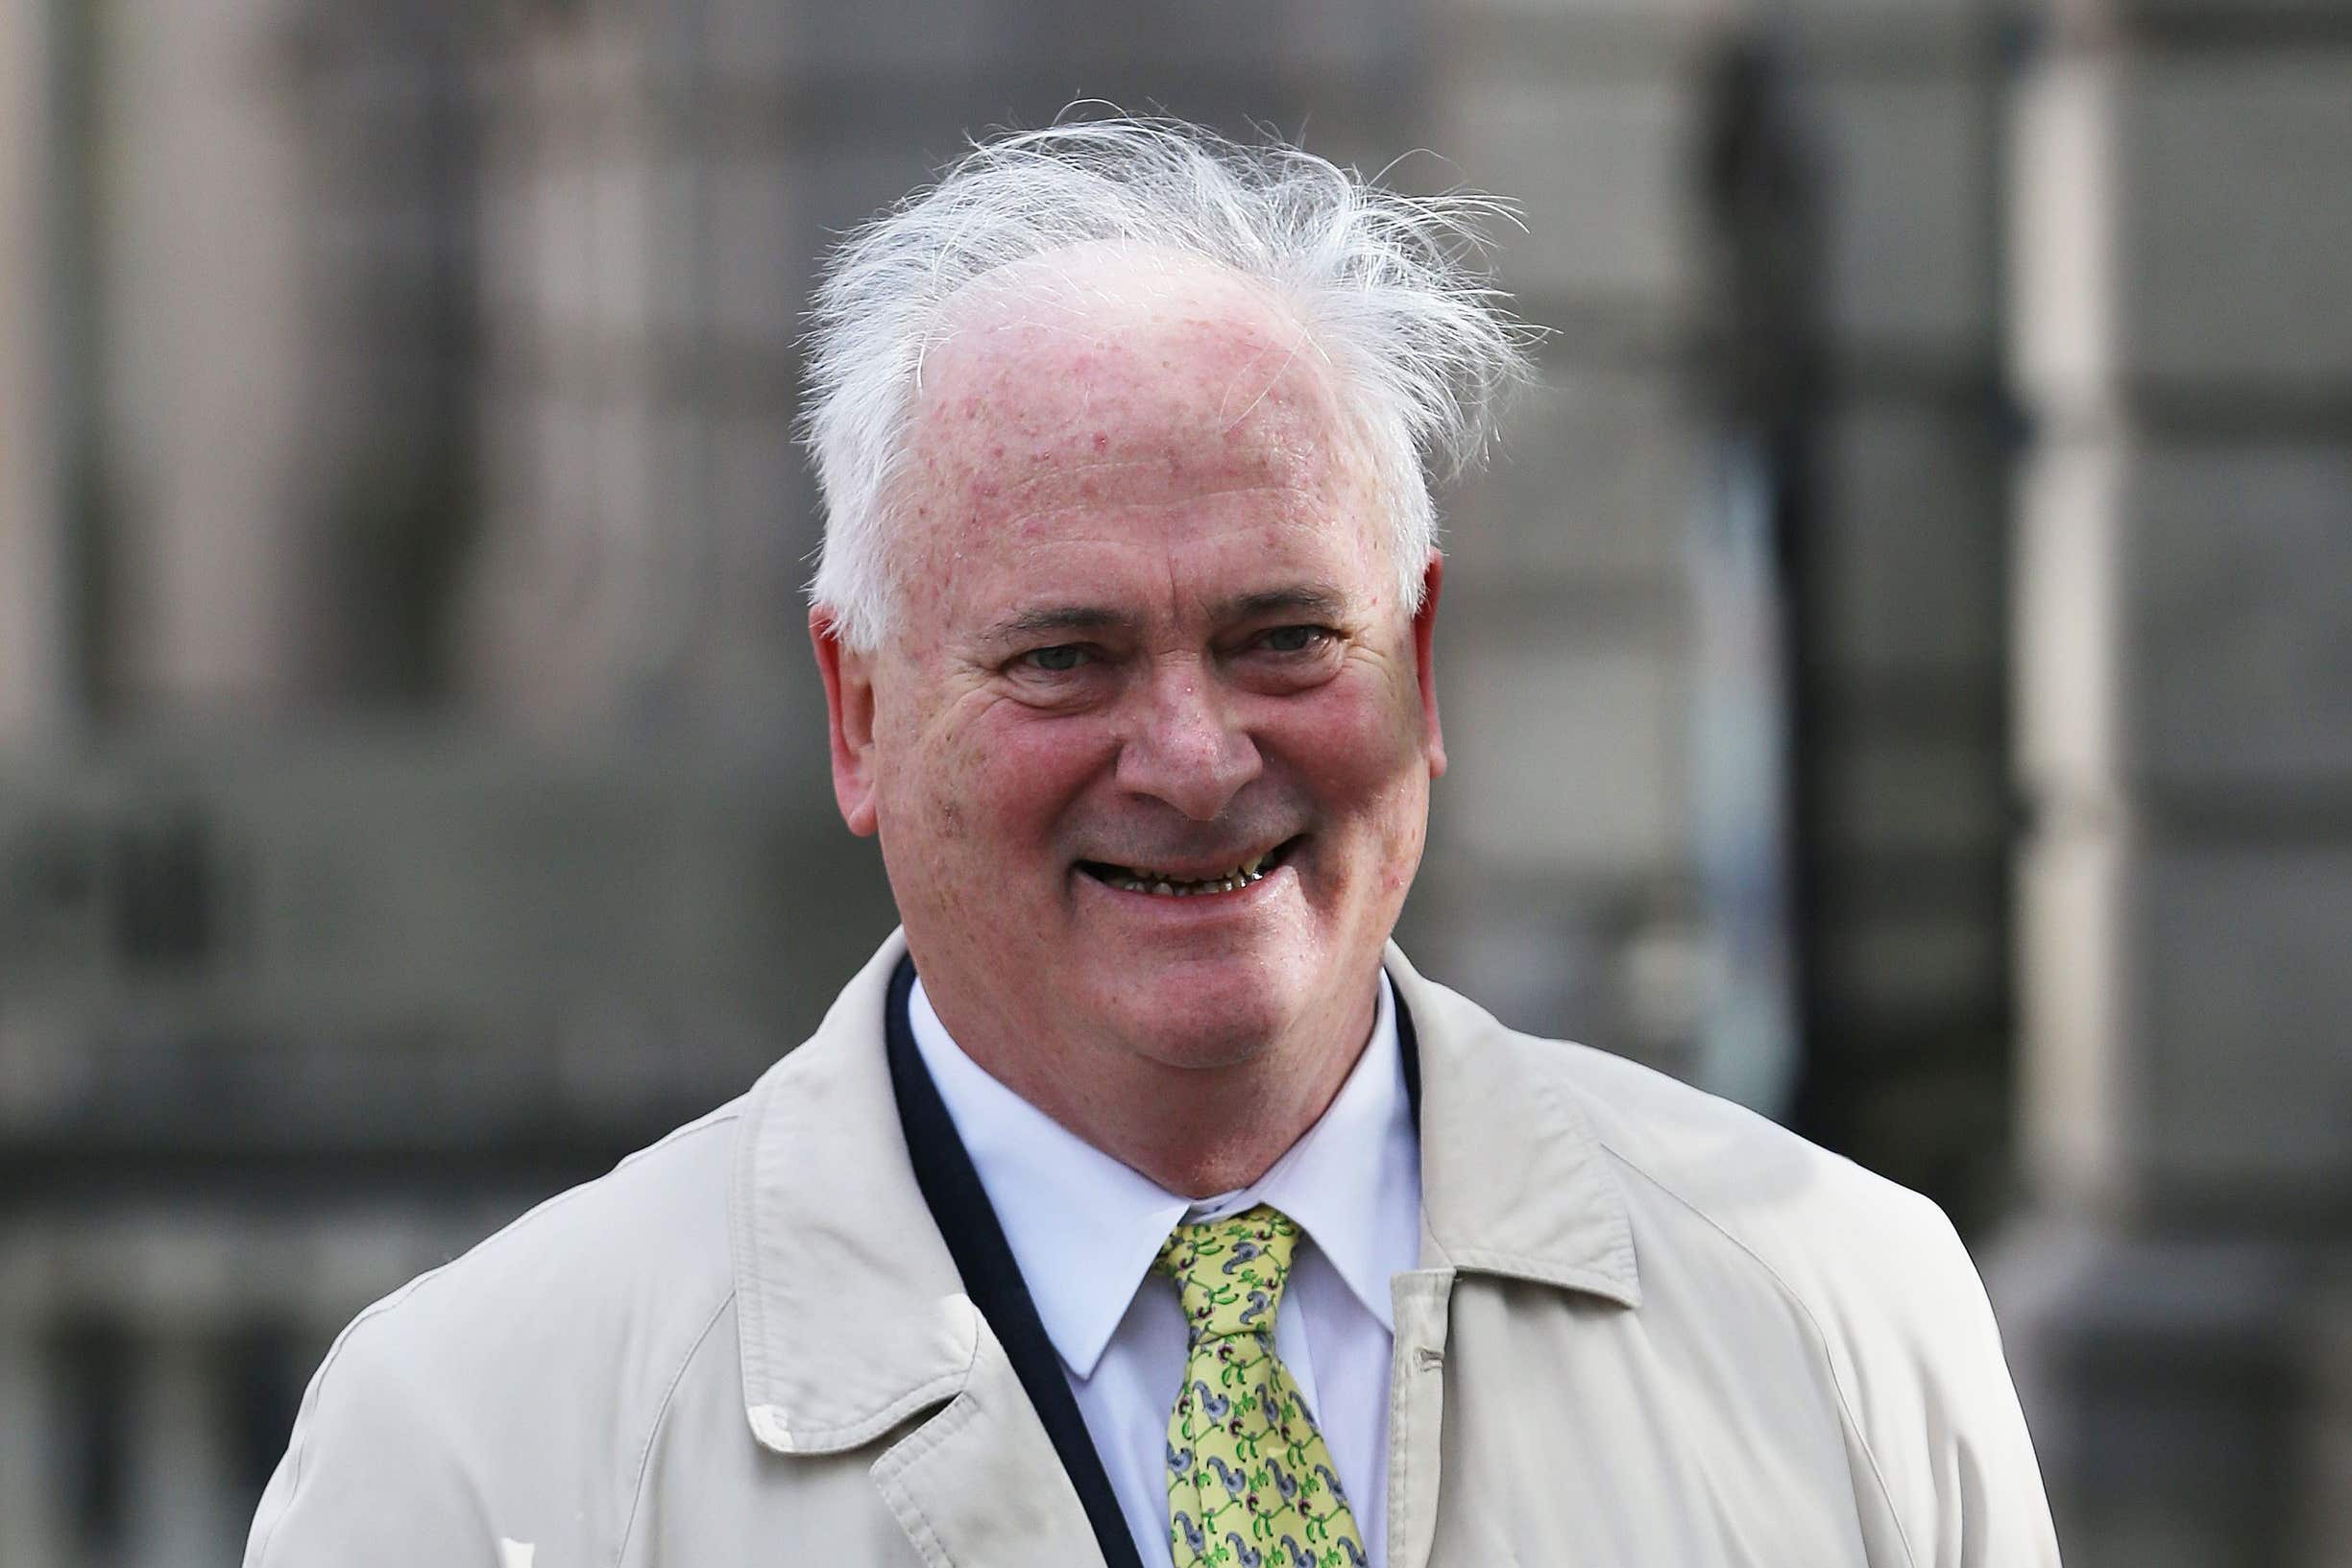 Former Irish premier John Bruton has died aged 76 following a long illness, his family has confirmed.